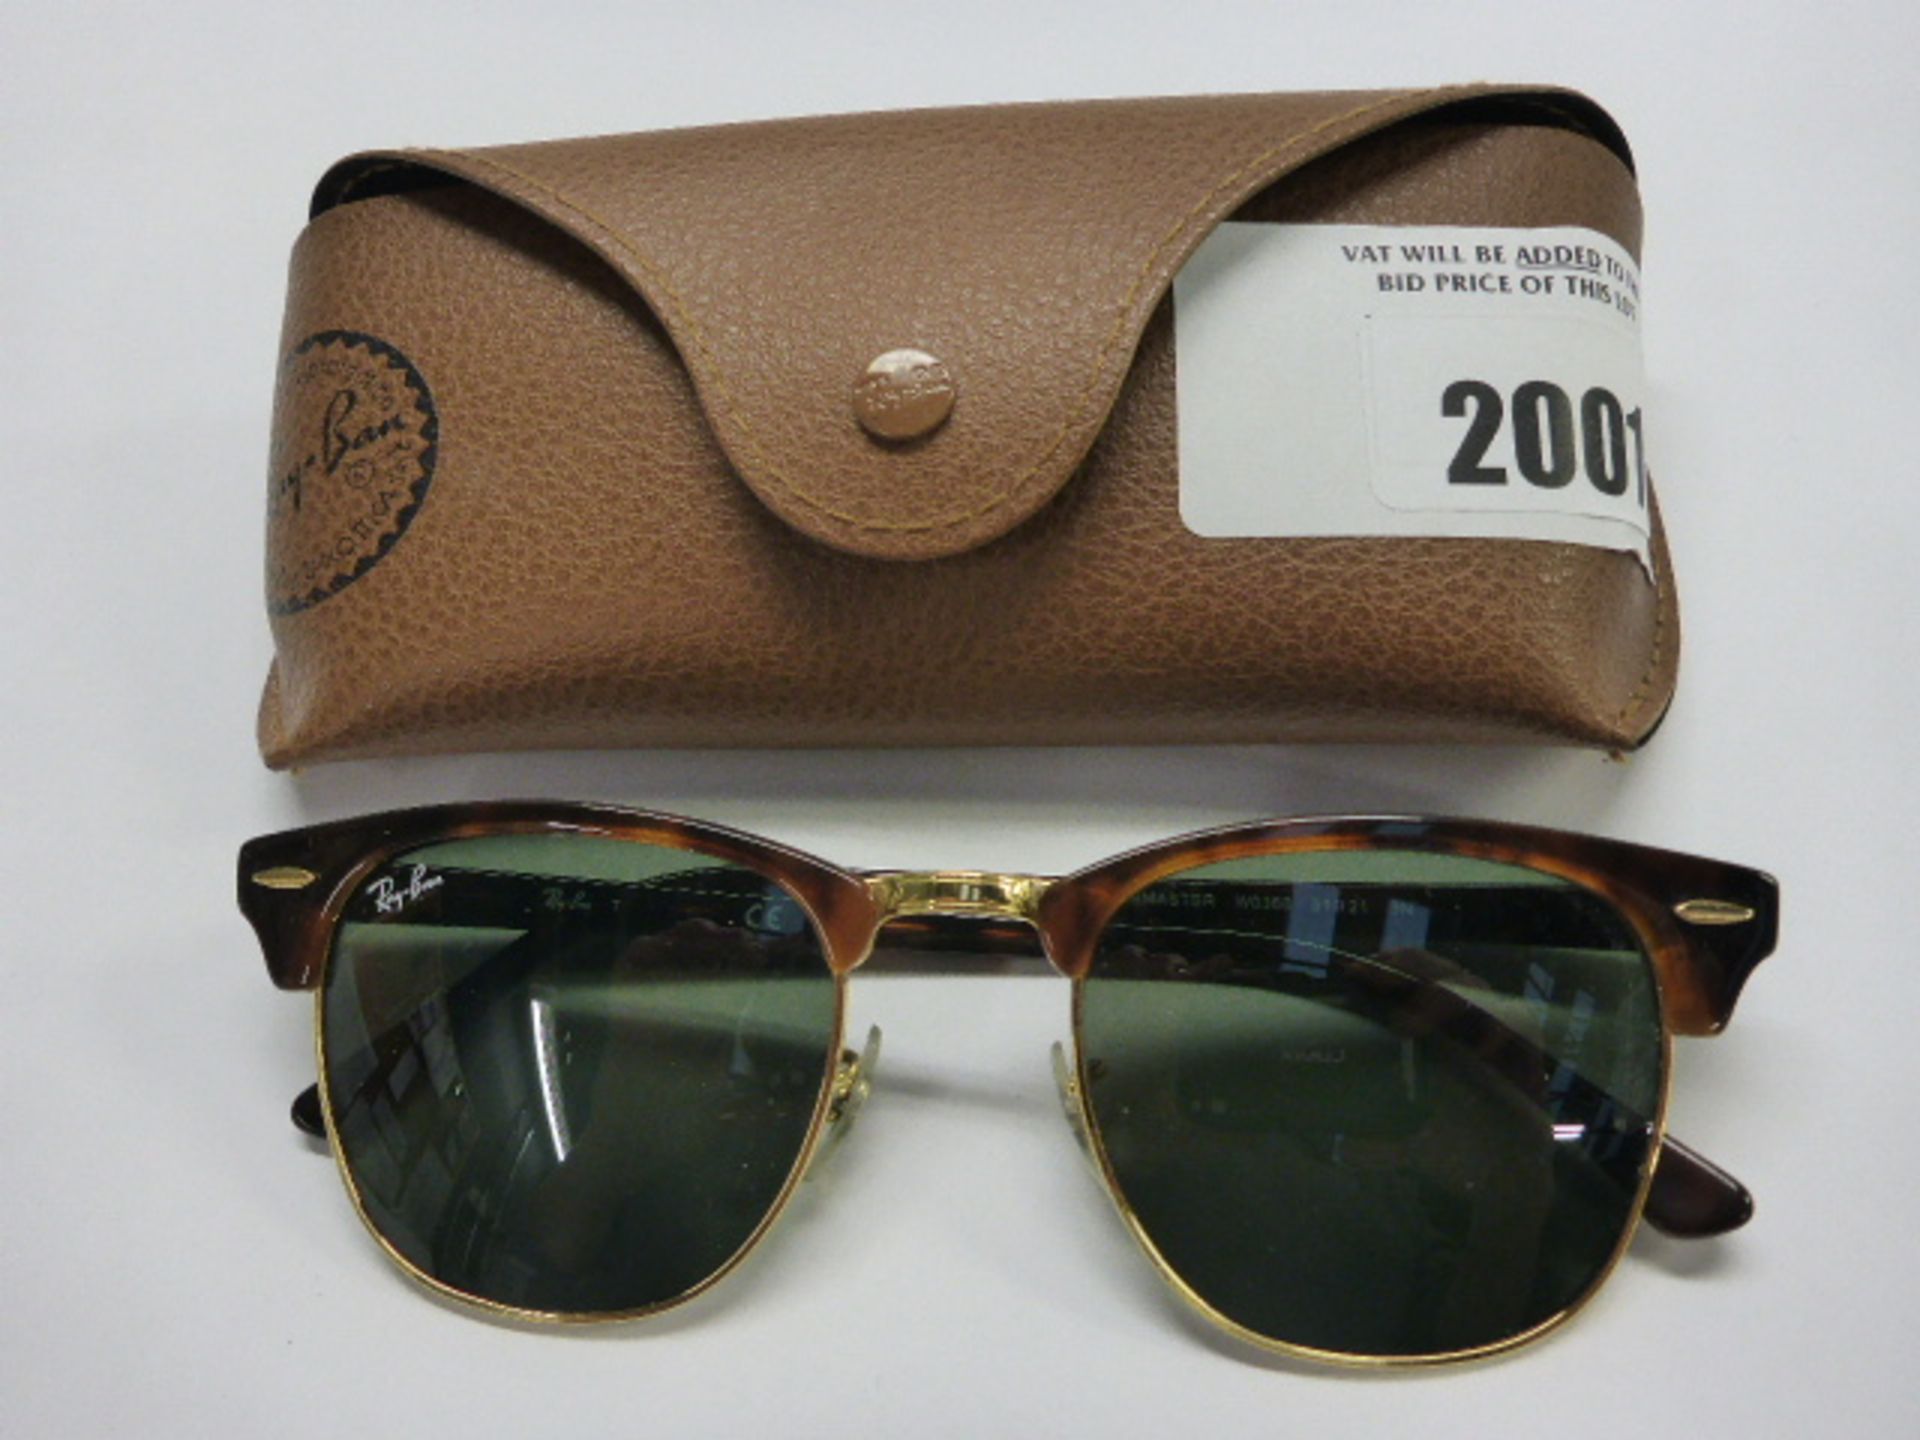 Ray-Ban Clubmaster RB 3016 sunglasses with case.